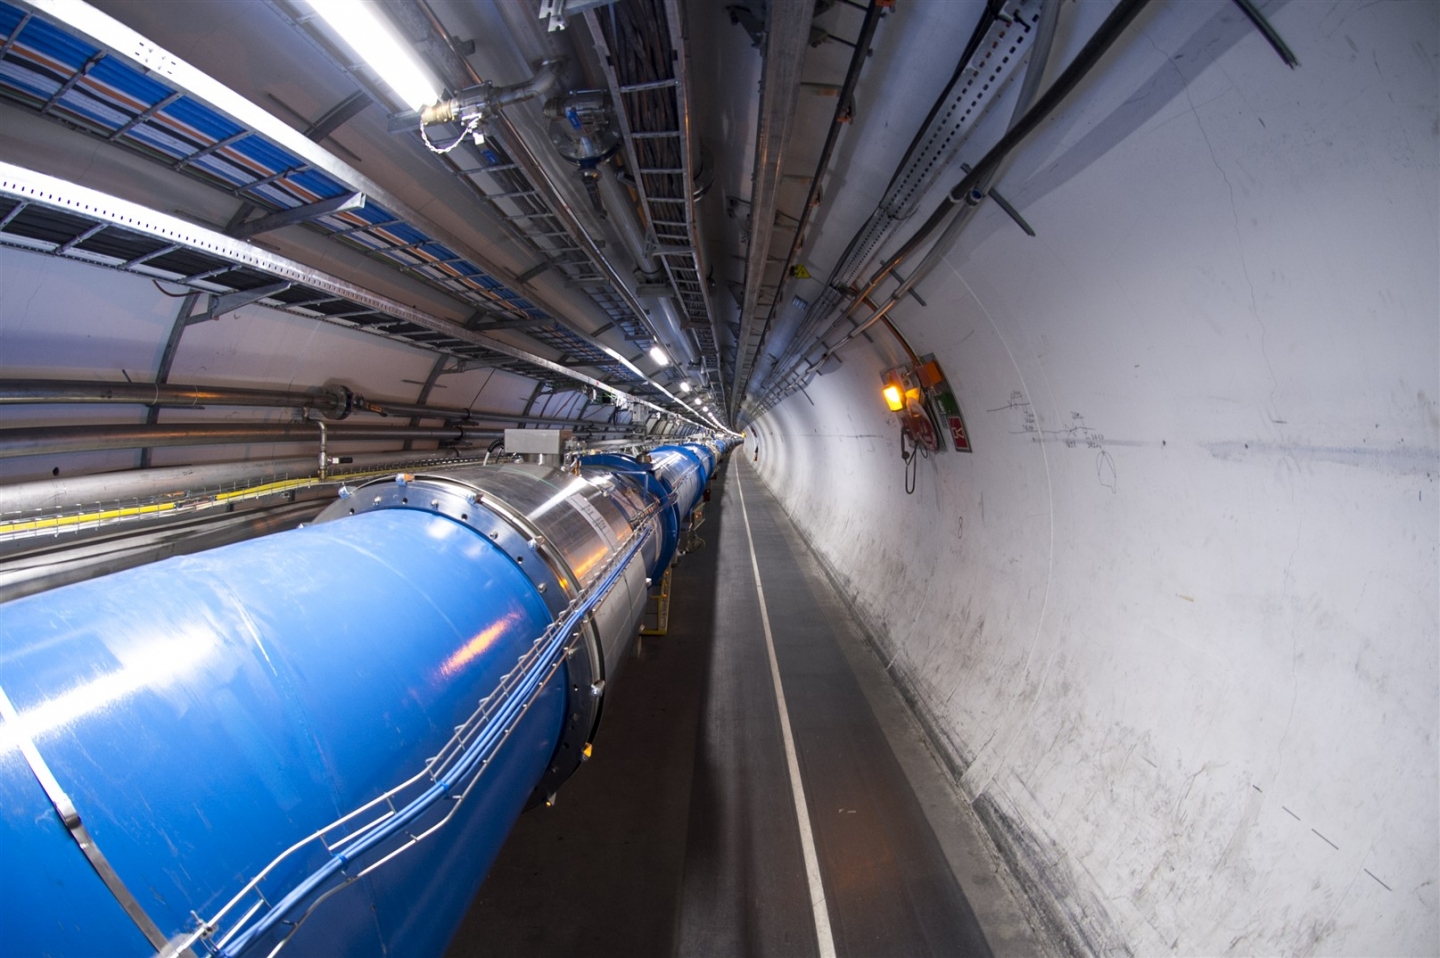 LHC pushes limits of performance 